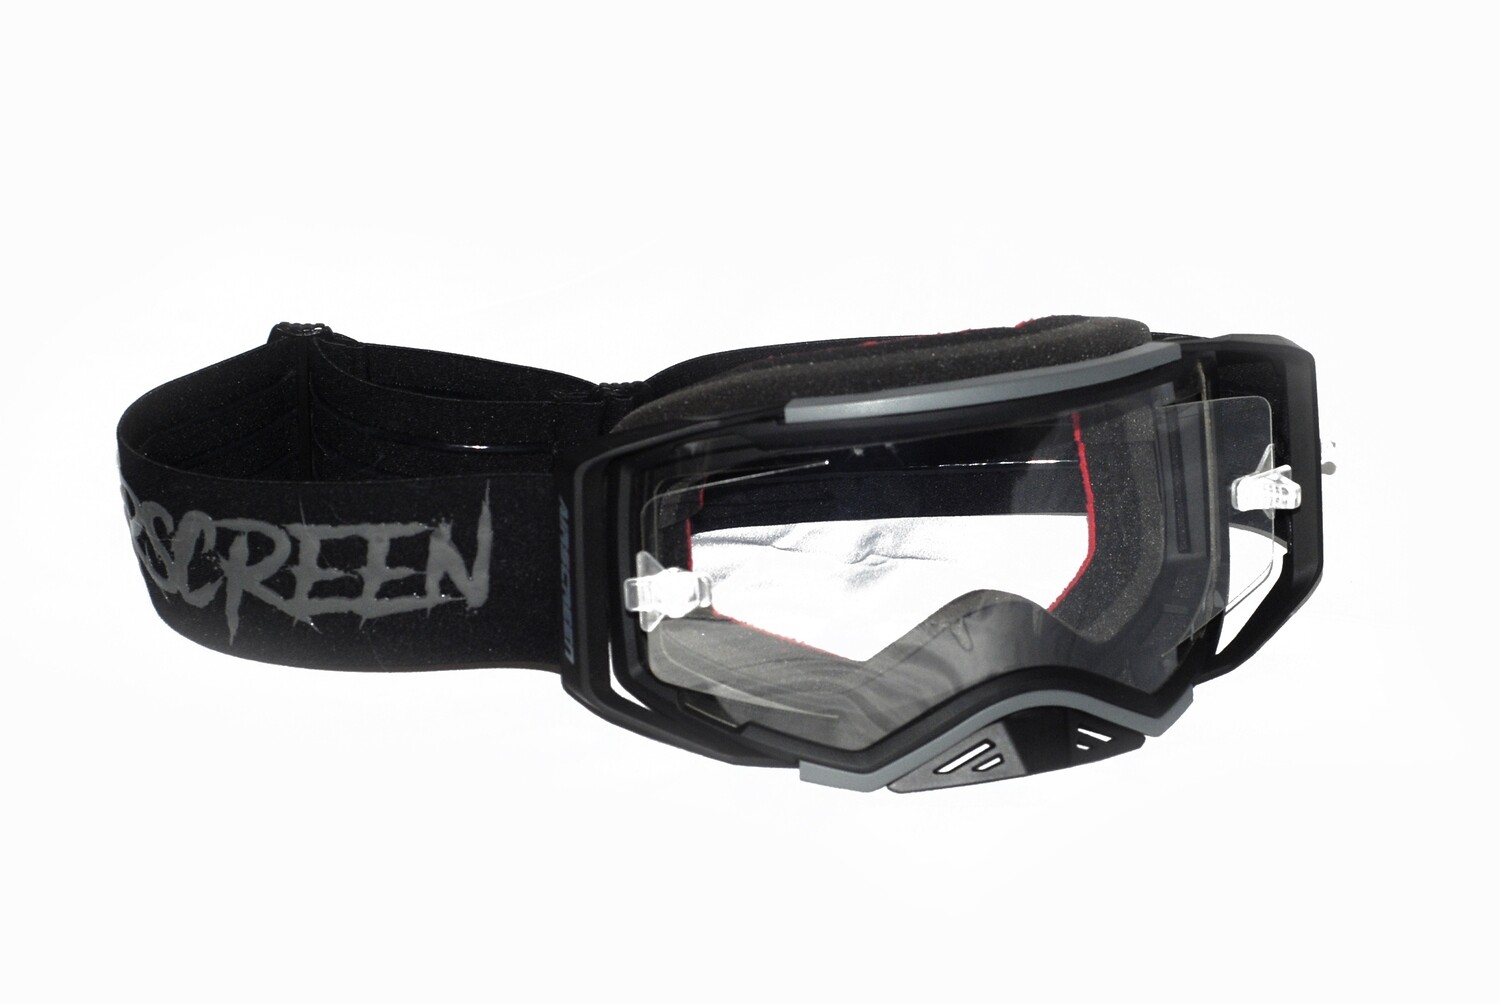 AirScreen AERO 04 EX goggle with openning lens